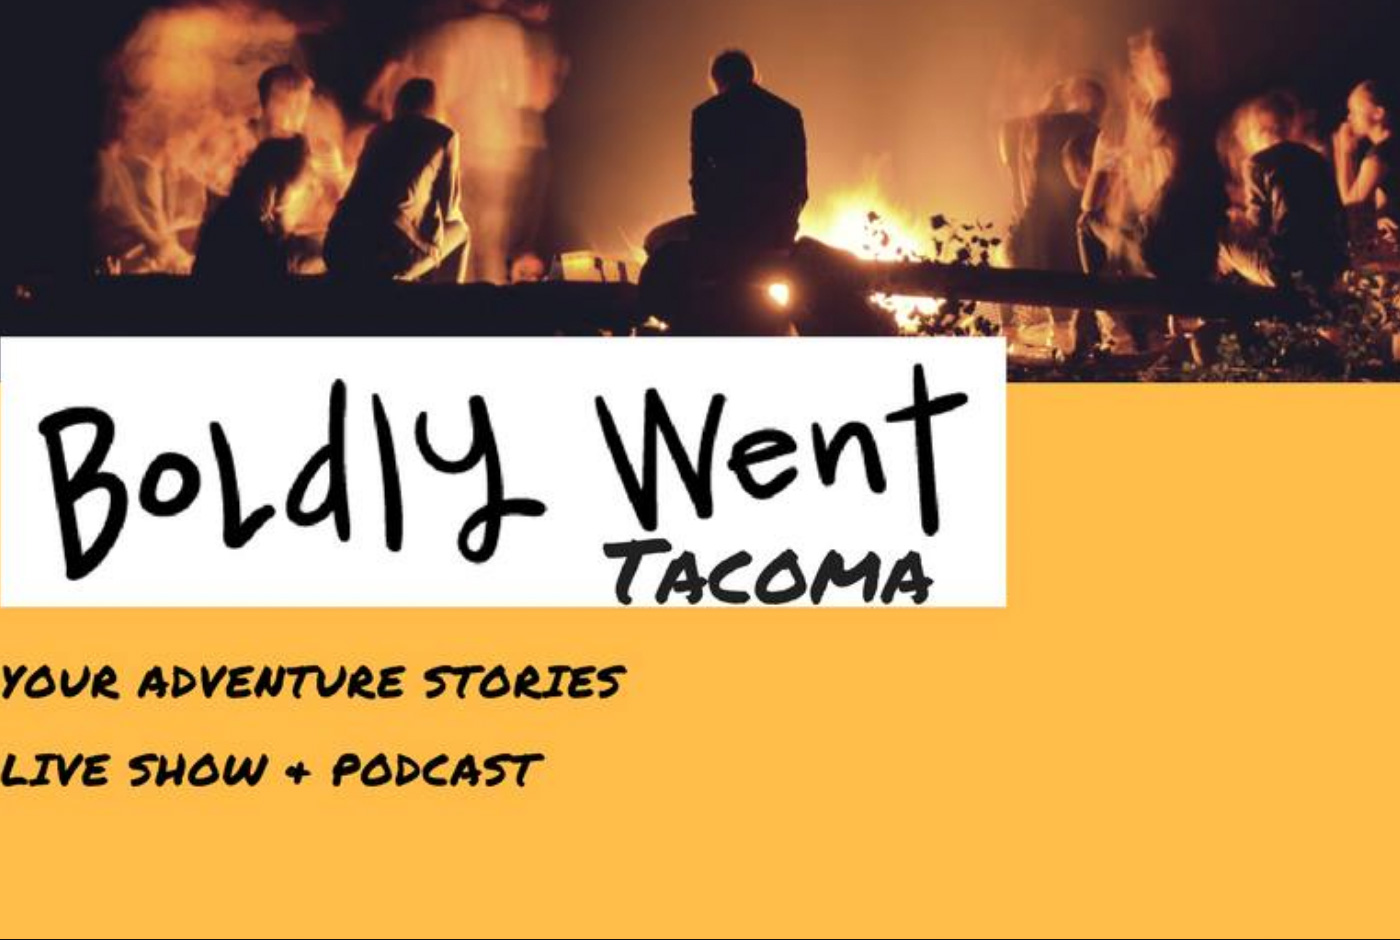 Tacoma-Boldly-Went-Your-Adventure-Stories-